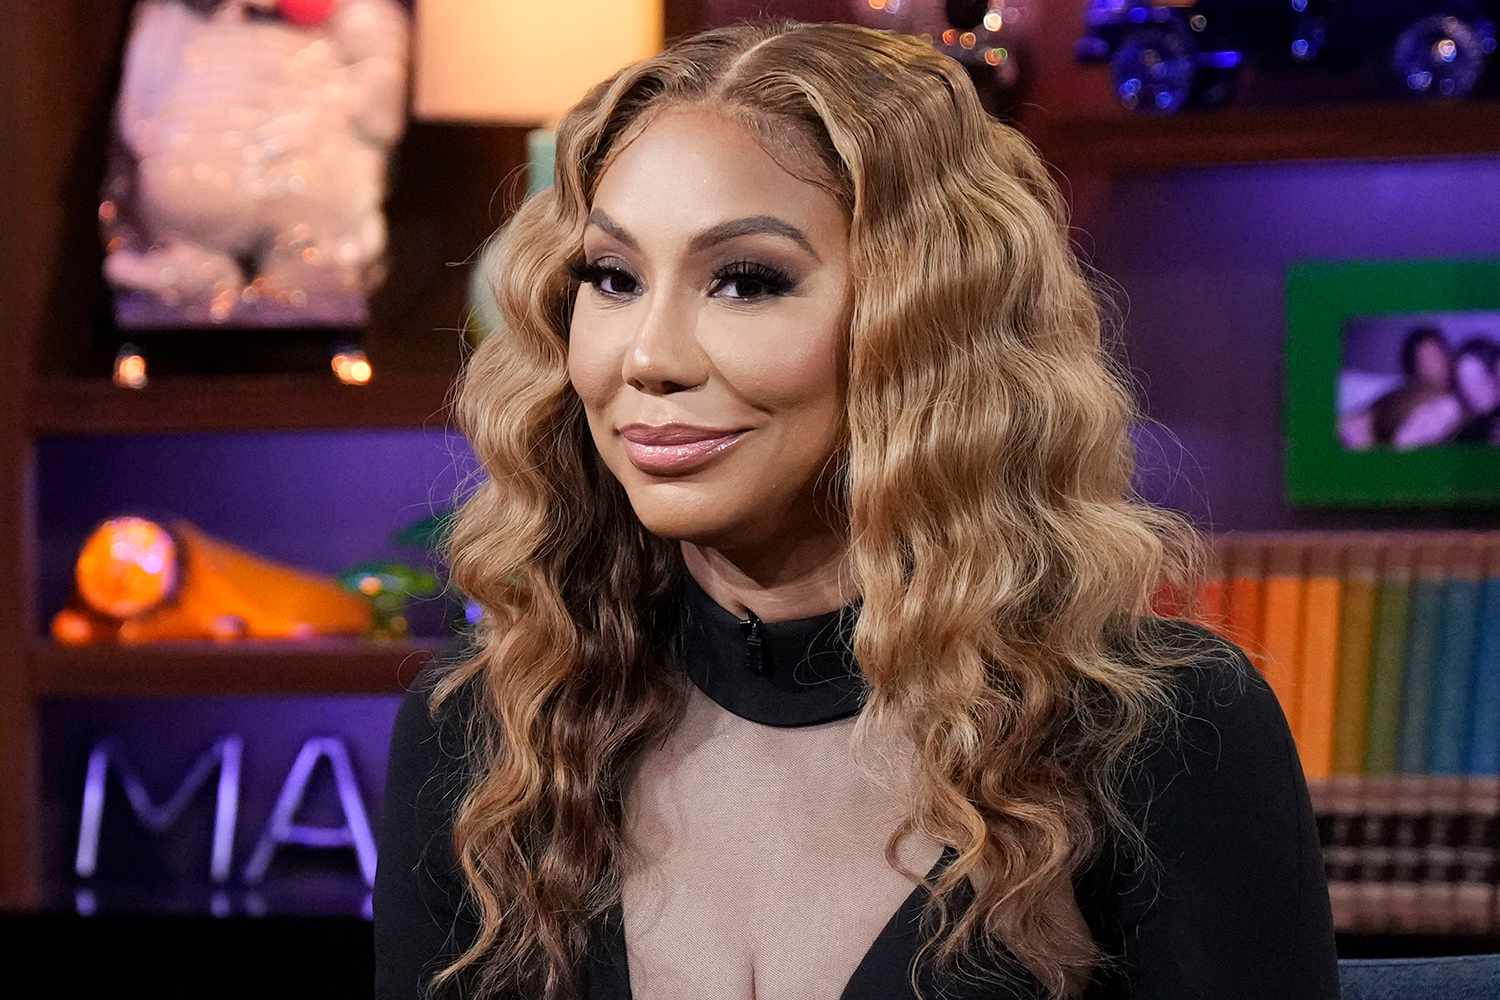 Tamar Braxton Reveals Why She Turned Down 'The Real Housewives of Atlanta': ‘All Money Ain’t Good Money’